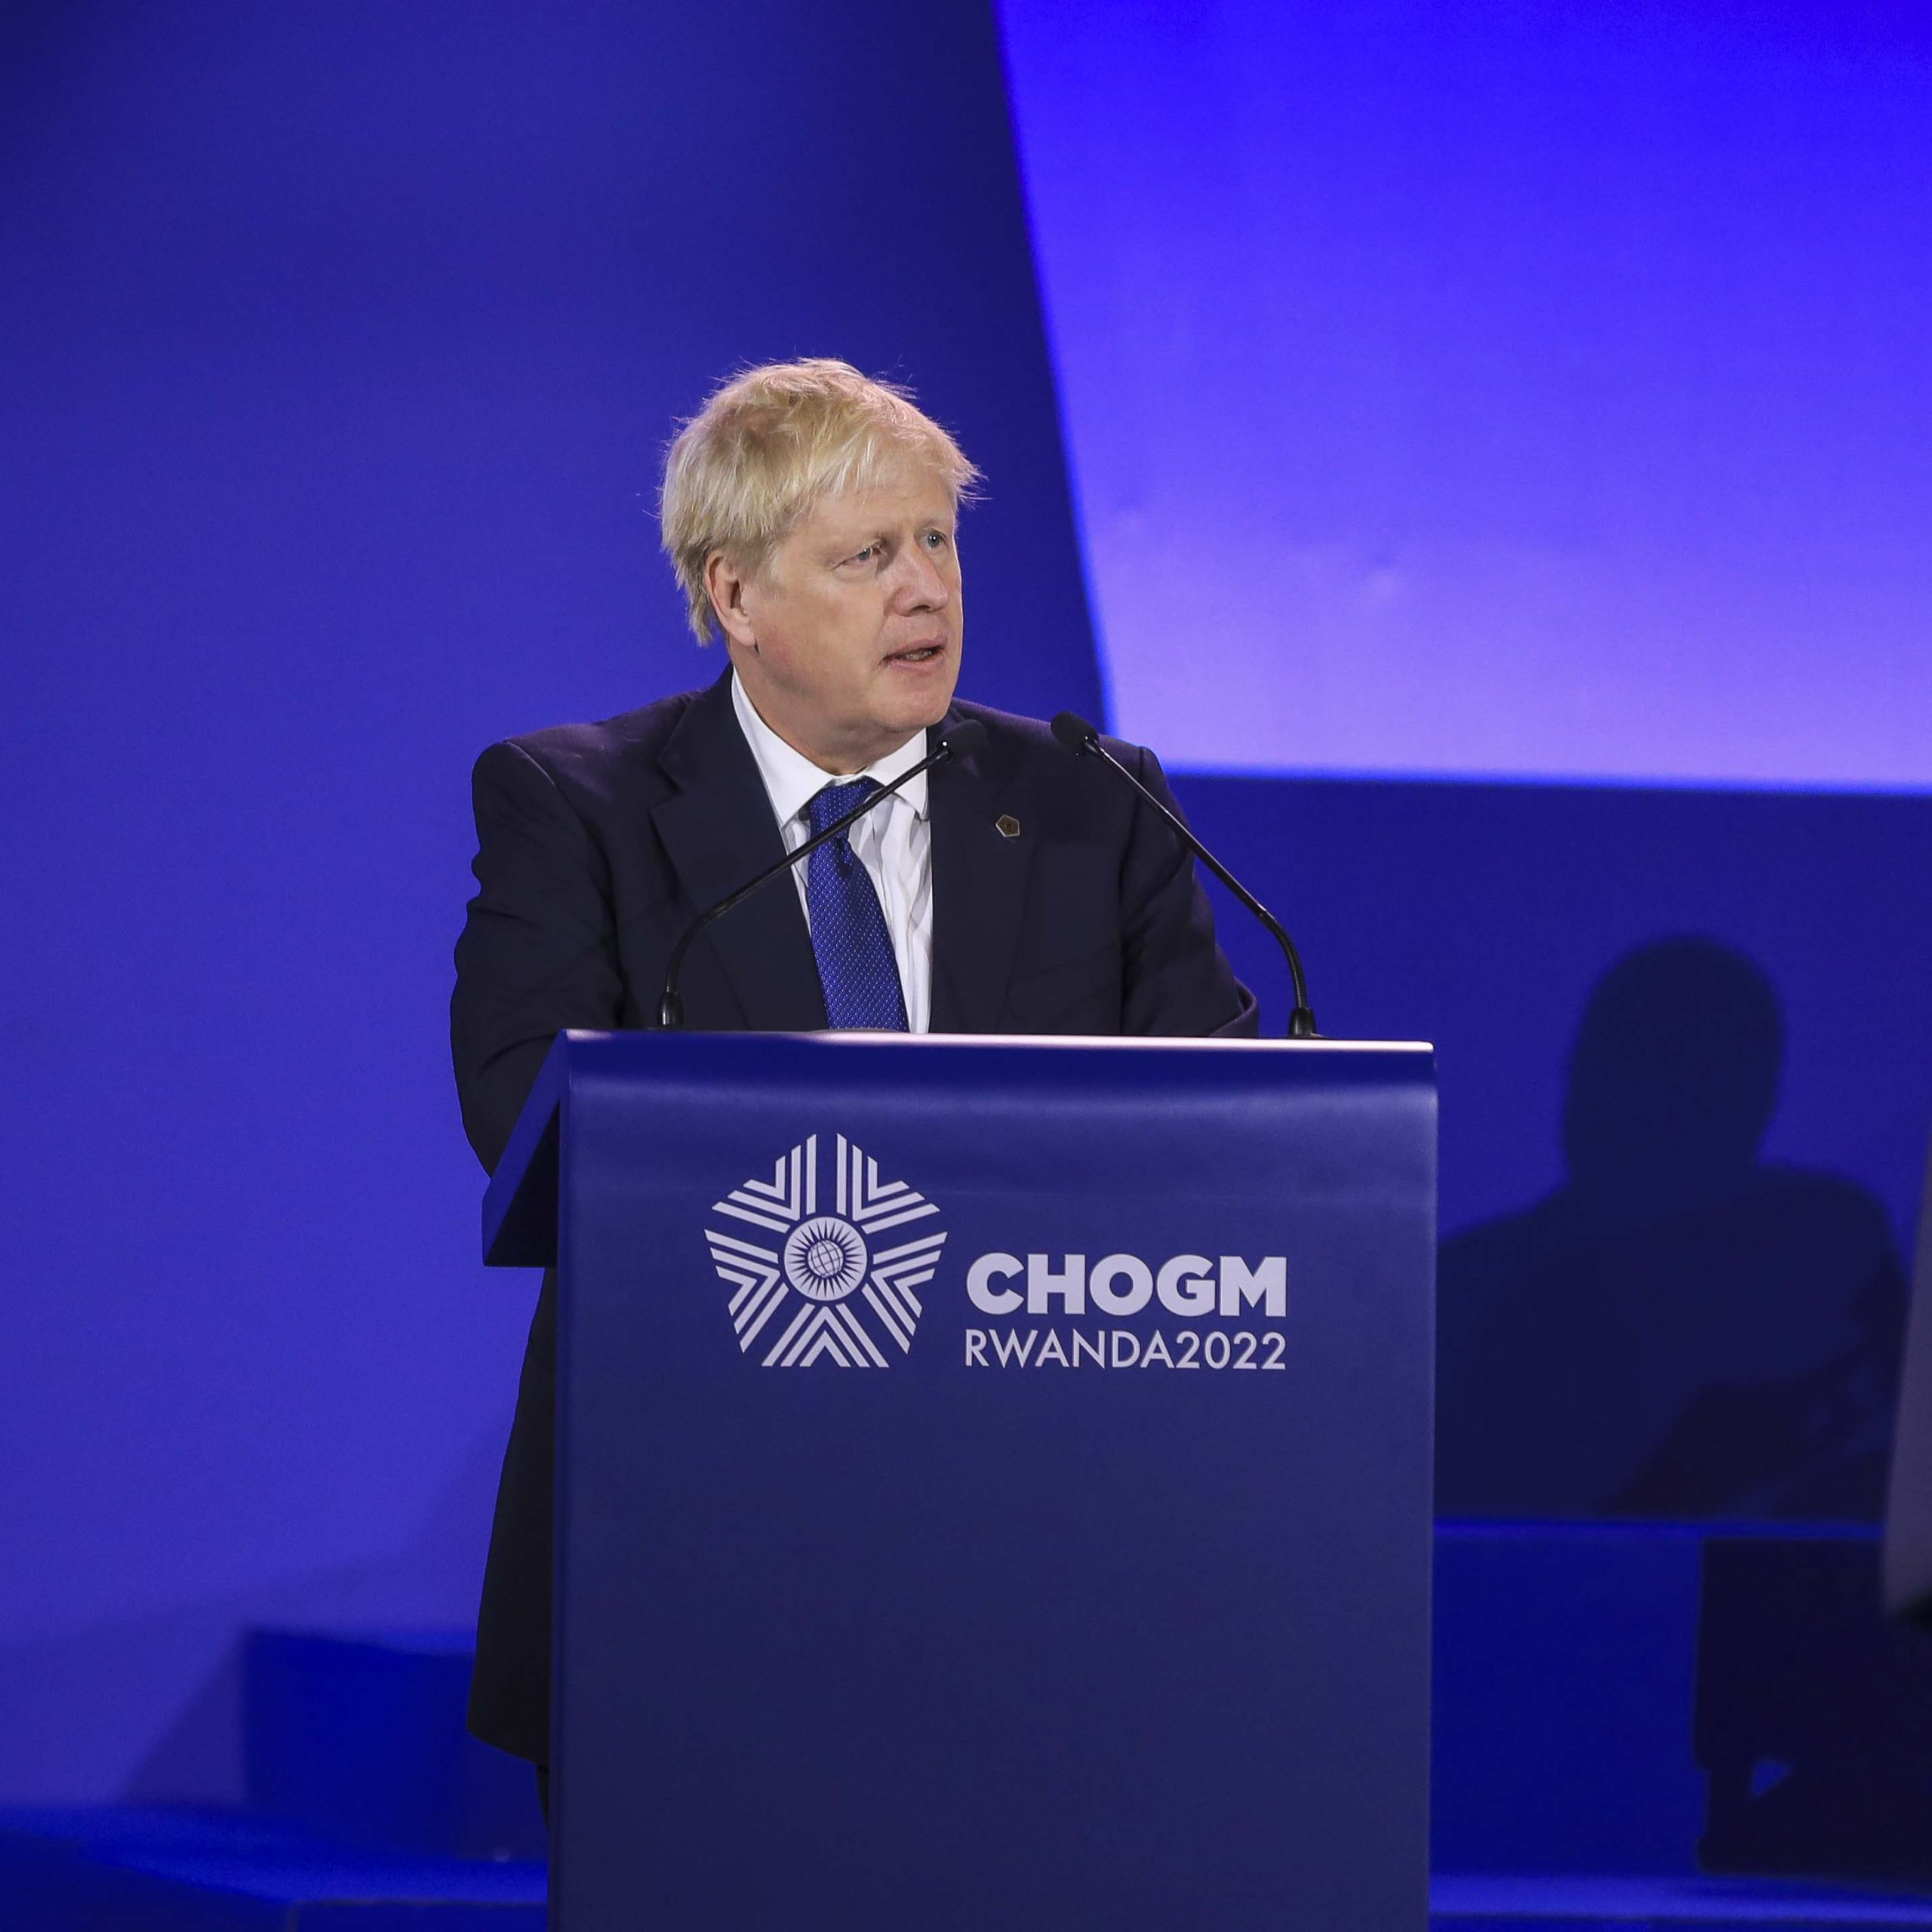 PM Boris Johnson’s Full Speech at The Official Opening of CHOGM 2022